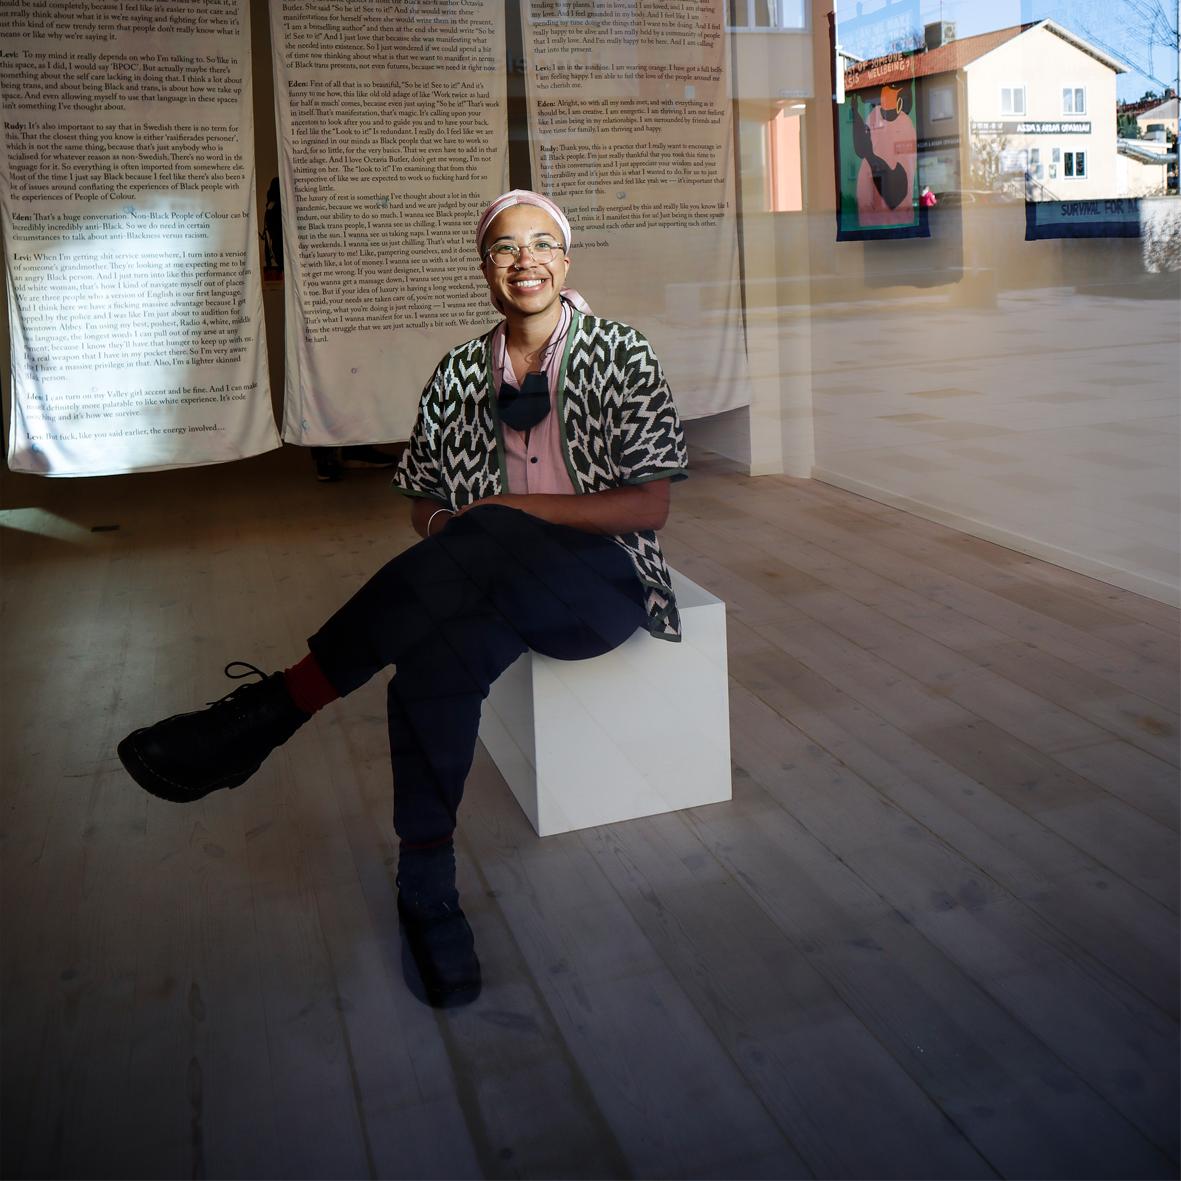 A photo of artist, Rudy Loewe, sitting in the middle of a gallery space on a white block. Rudy has joyful a smile and wears black trousers, a black and white short-sleeved jacket, a pink shirt and matching pink bandana.